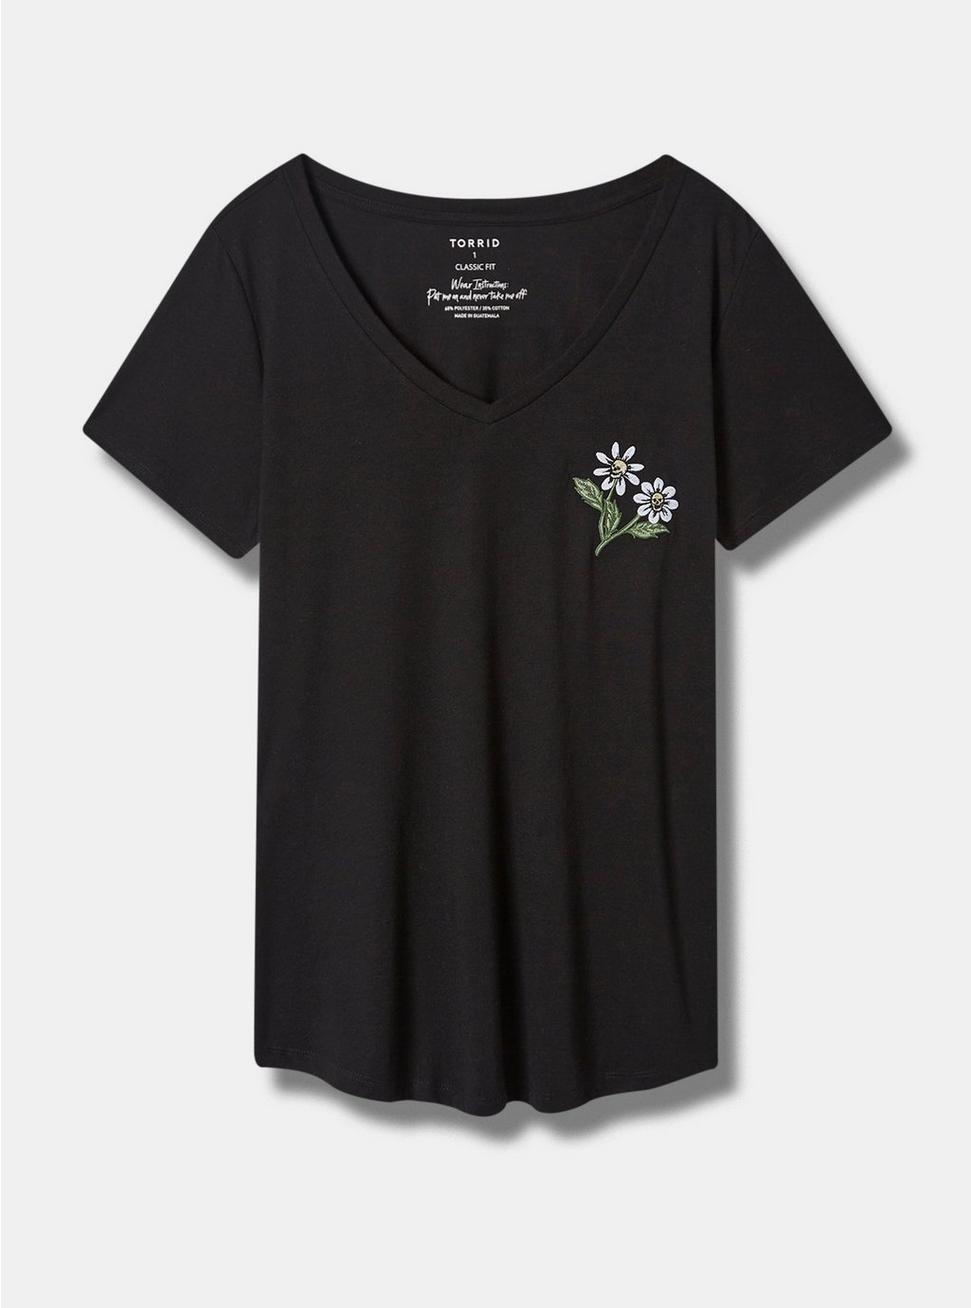 Skull Daisy Embroidered Girlfriend Classic Fit V-Neck Tee, DEEP BLACK, hi-res